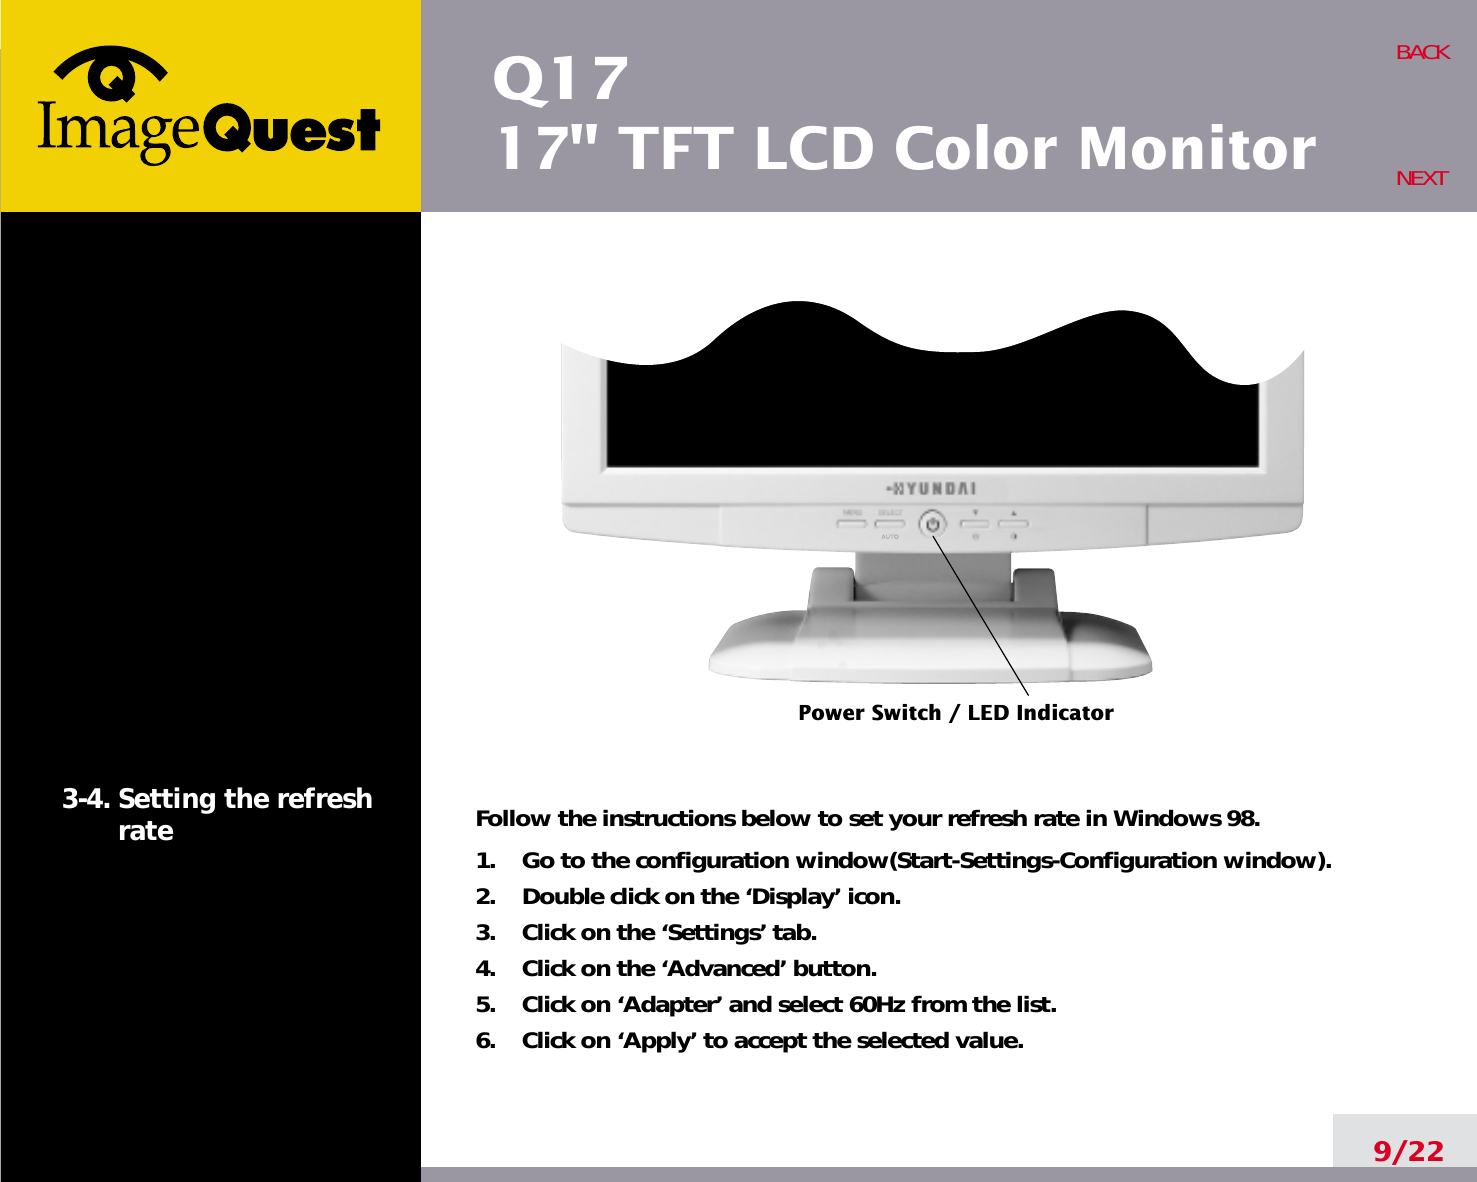 Q1717&quot; TFT LCD Color Monitor9/22BACKNEXT3-4. Setting the refreshrate Follow the instructions below to set your refresh rate in Windows 98.1.    Go to the configuration window(Start-Settings-Configuration window).2.    Double click on the ‘Display’ icon.3.    Click on the ‘Settings’ tab.4.    Click on the ‘Advanced’ button.5.    Click on ‘Adapter’ and select 60Hz from the list.6.    Click on ‘Apply’ to accept the selected value.Power Switch / LED Indicator